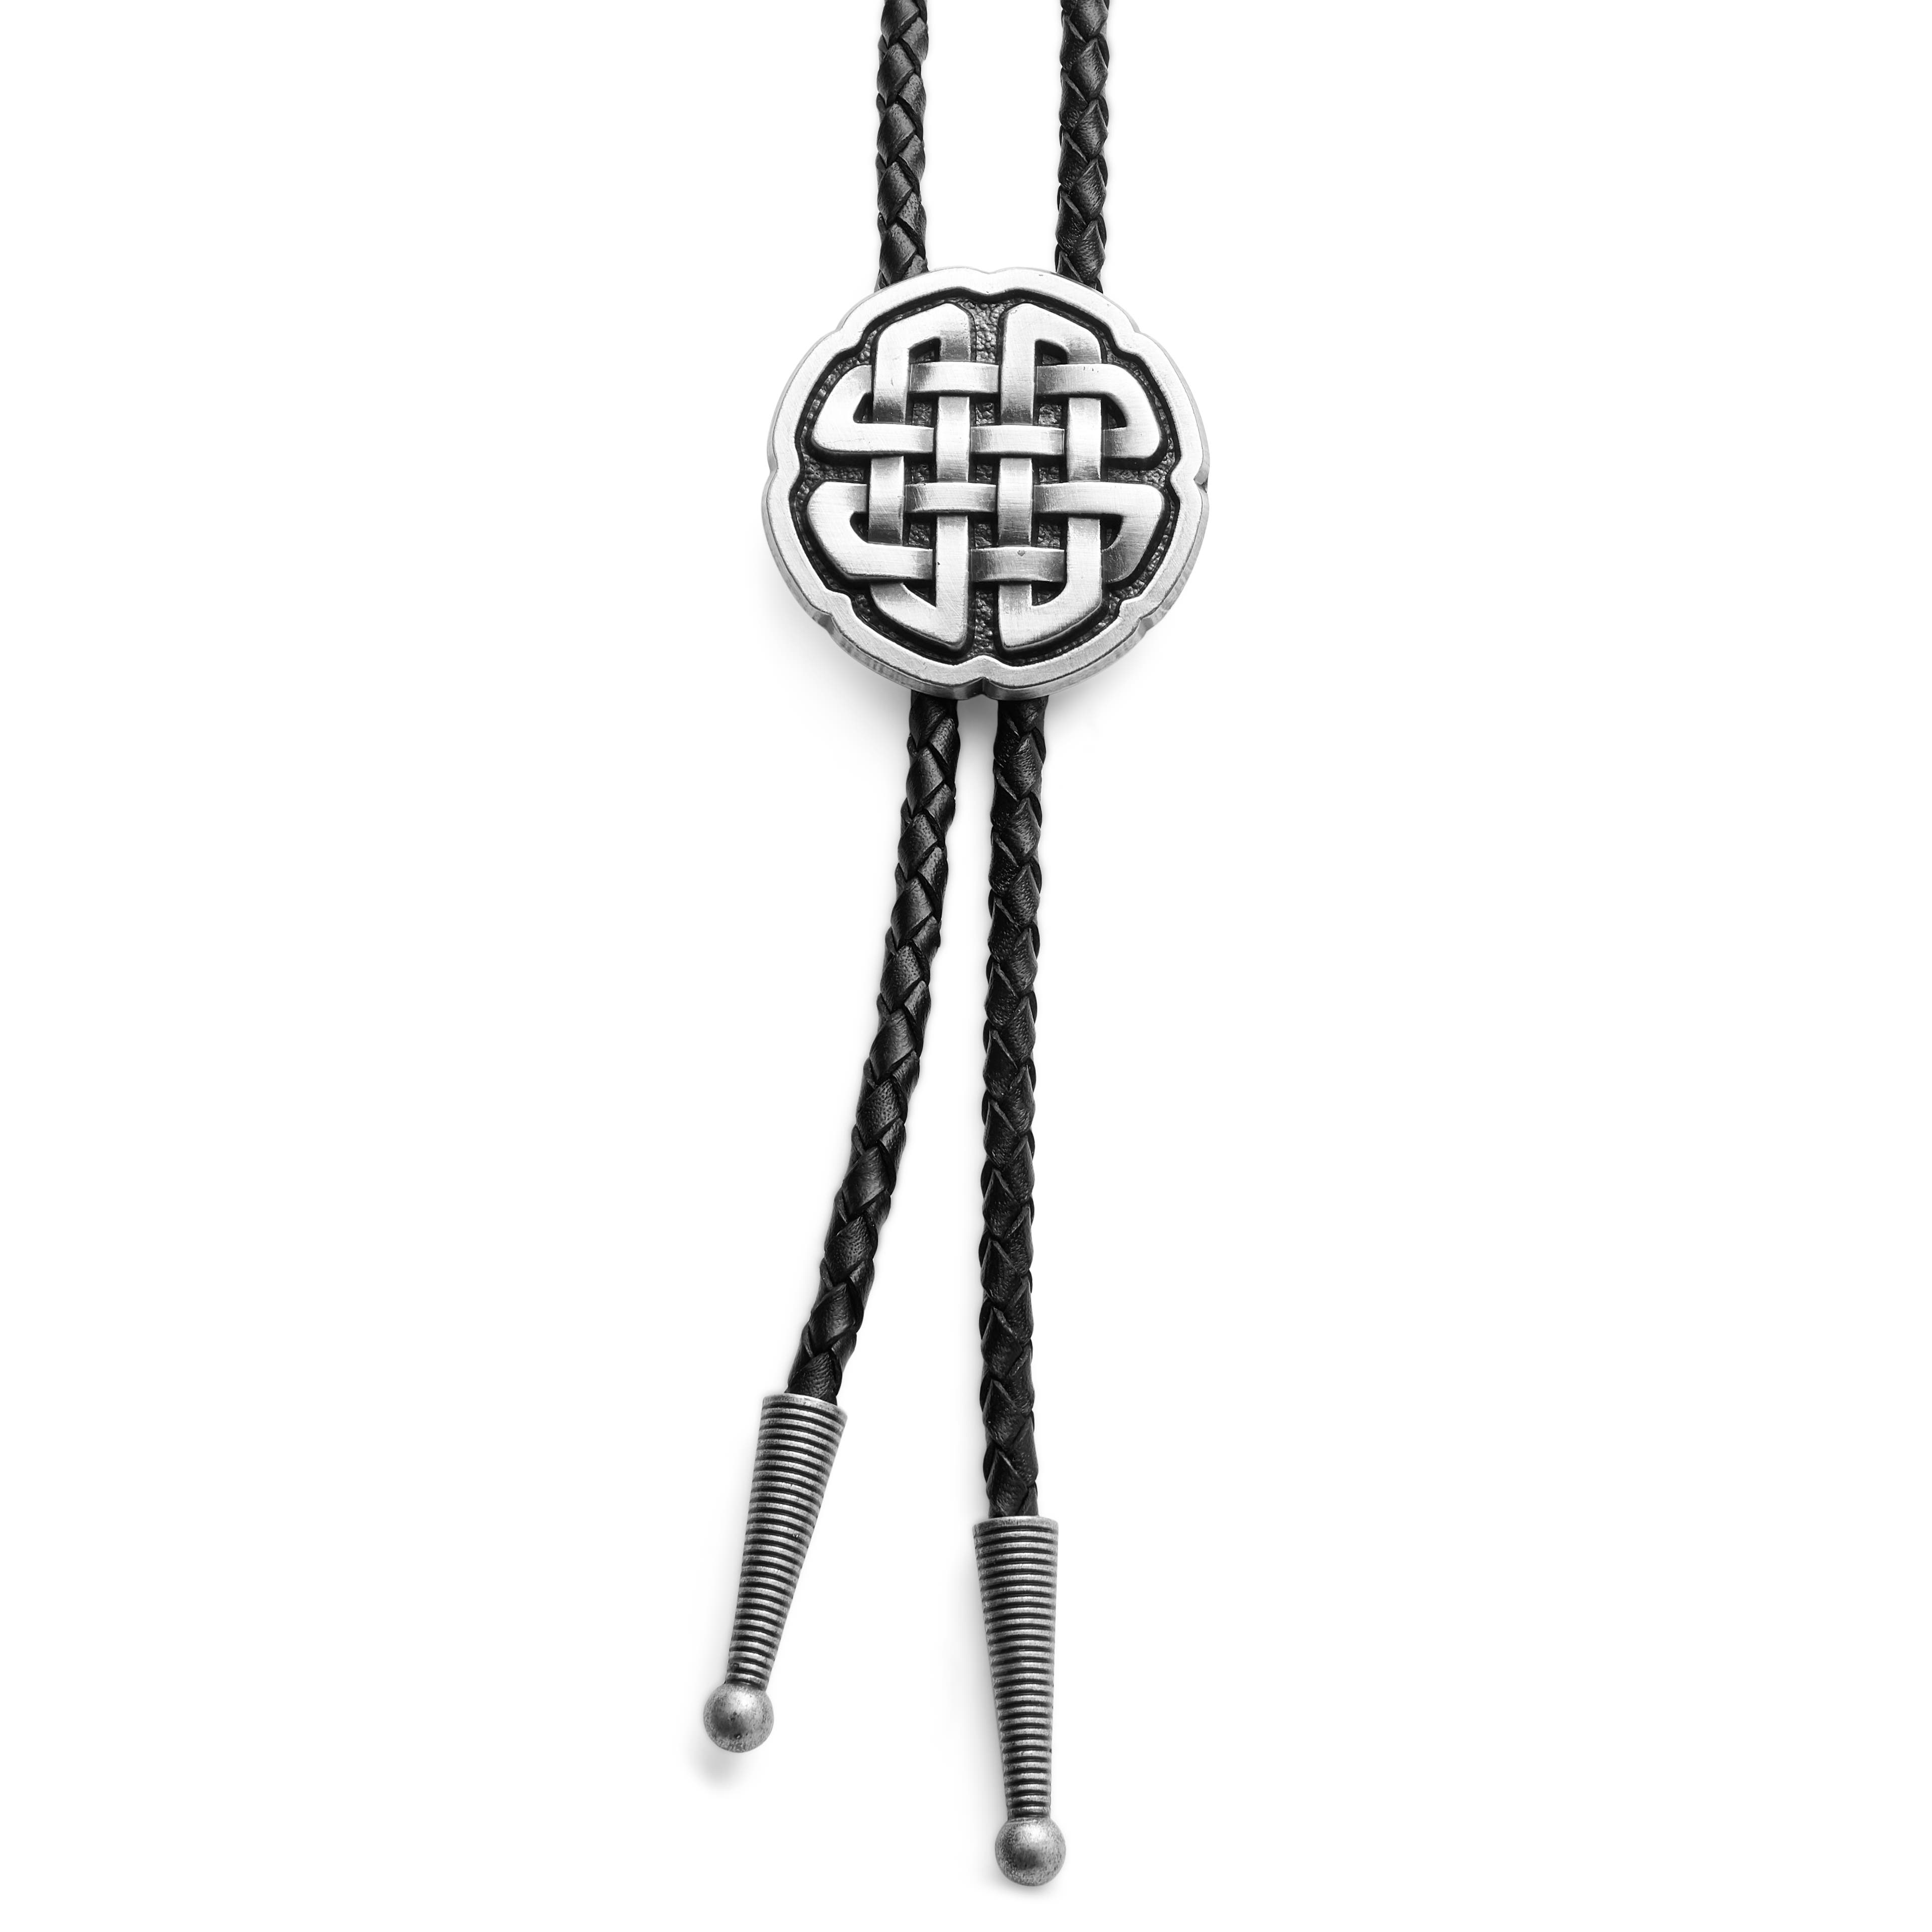 Celtic Knot Adjustable Braided Leather Bolo Tie